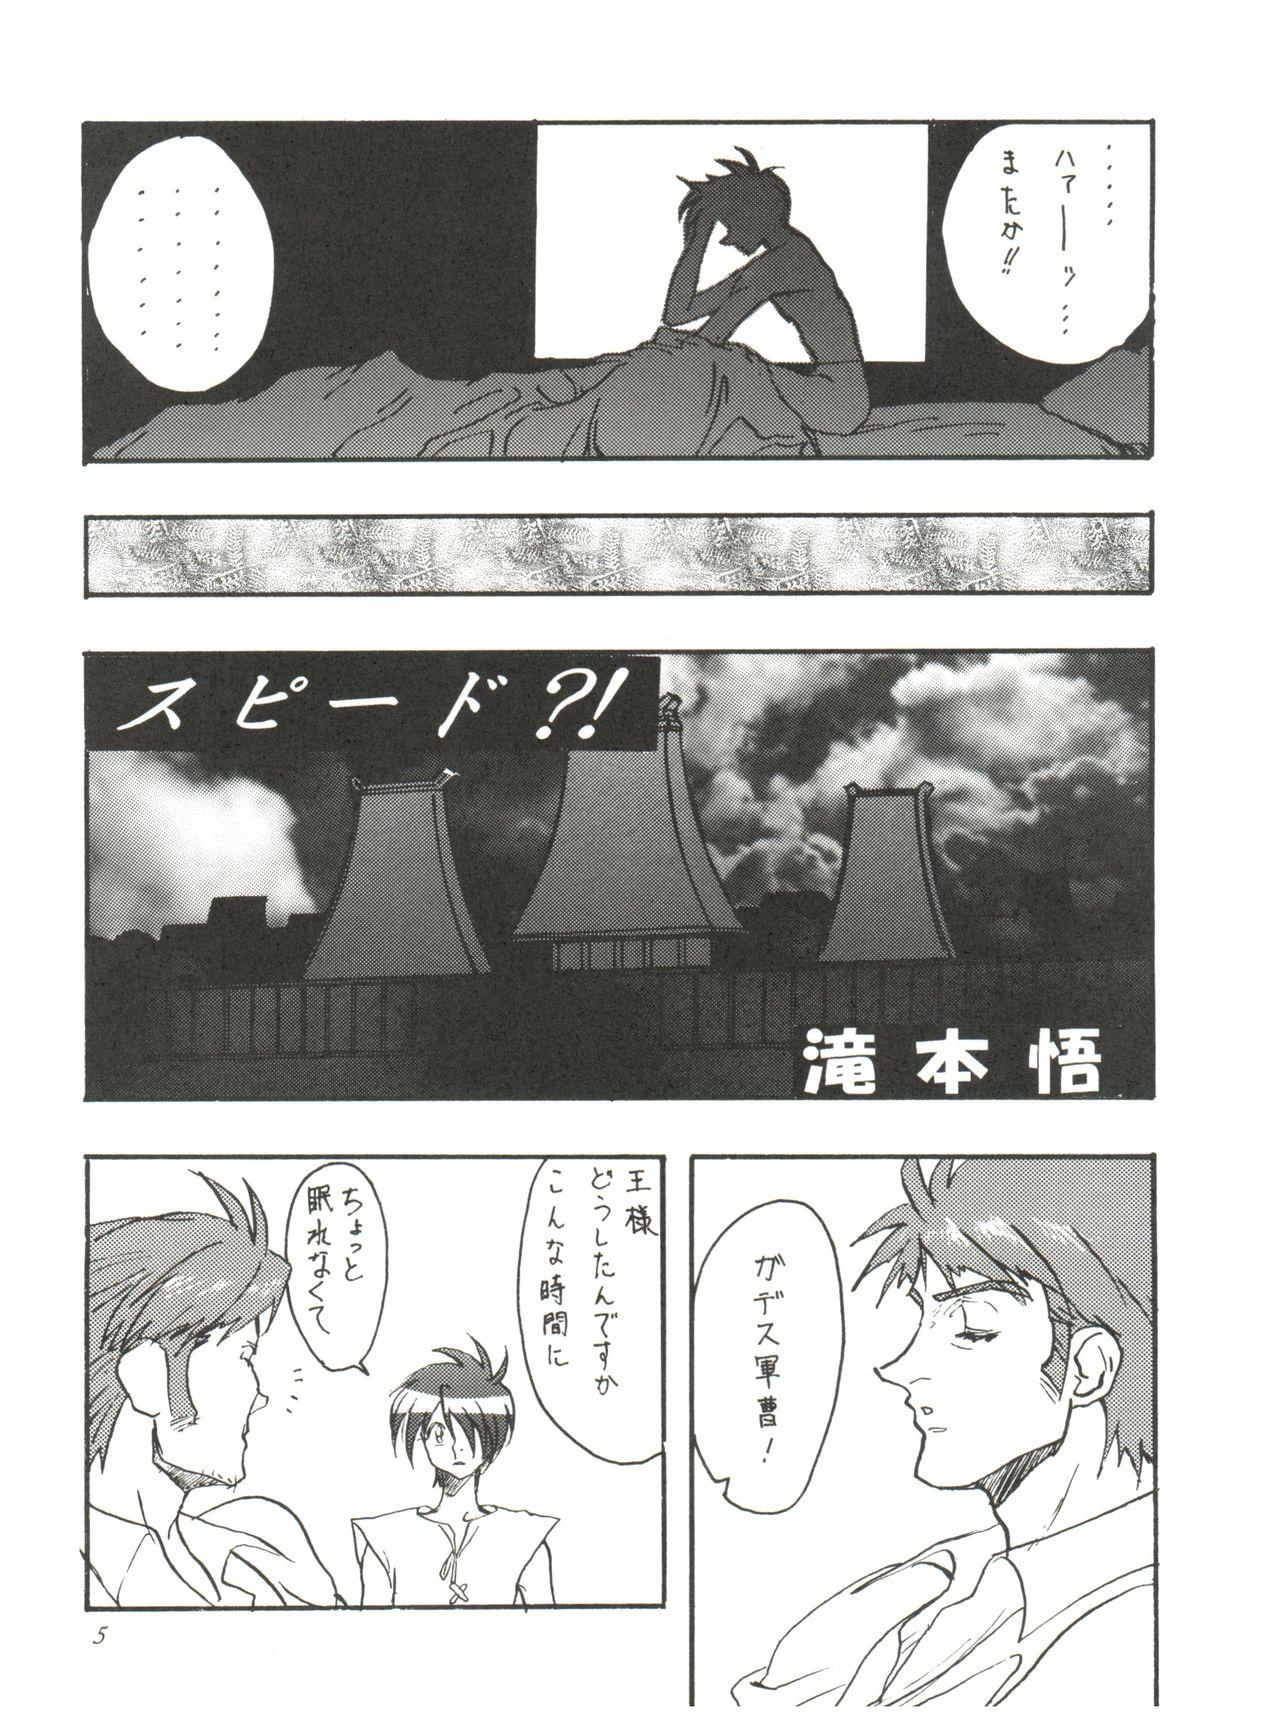 Perfect Ass AREA CODE III - Detective conan The vision of escaflowne Pussyfucking - Page 4